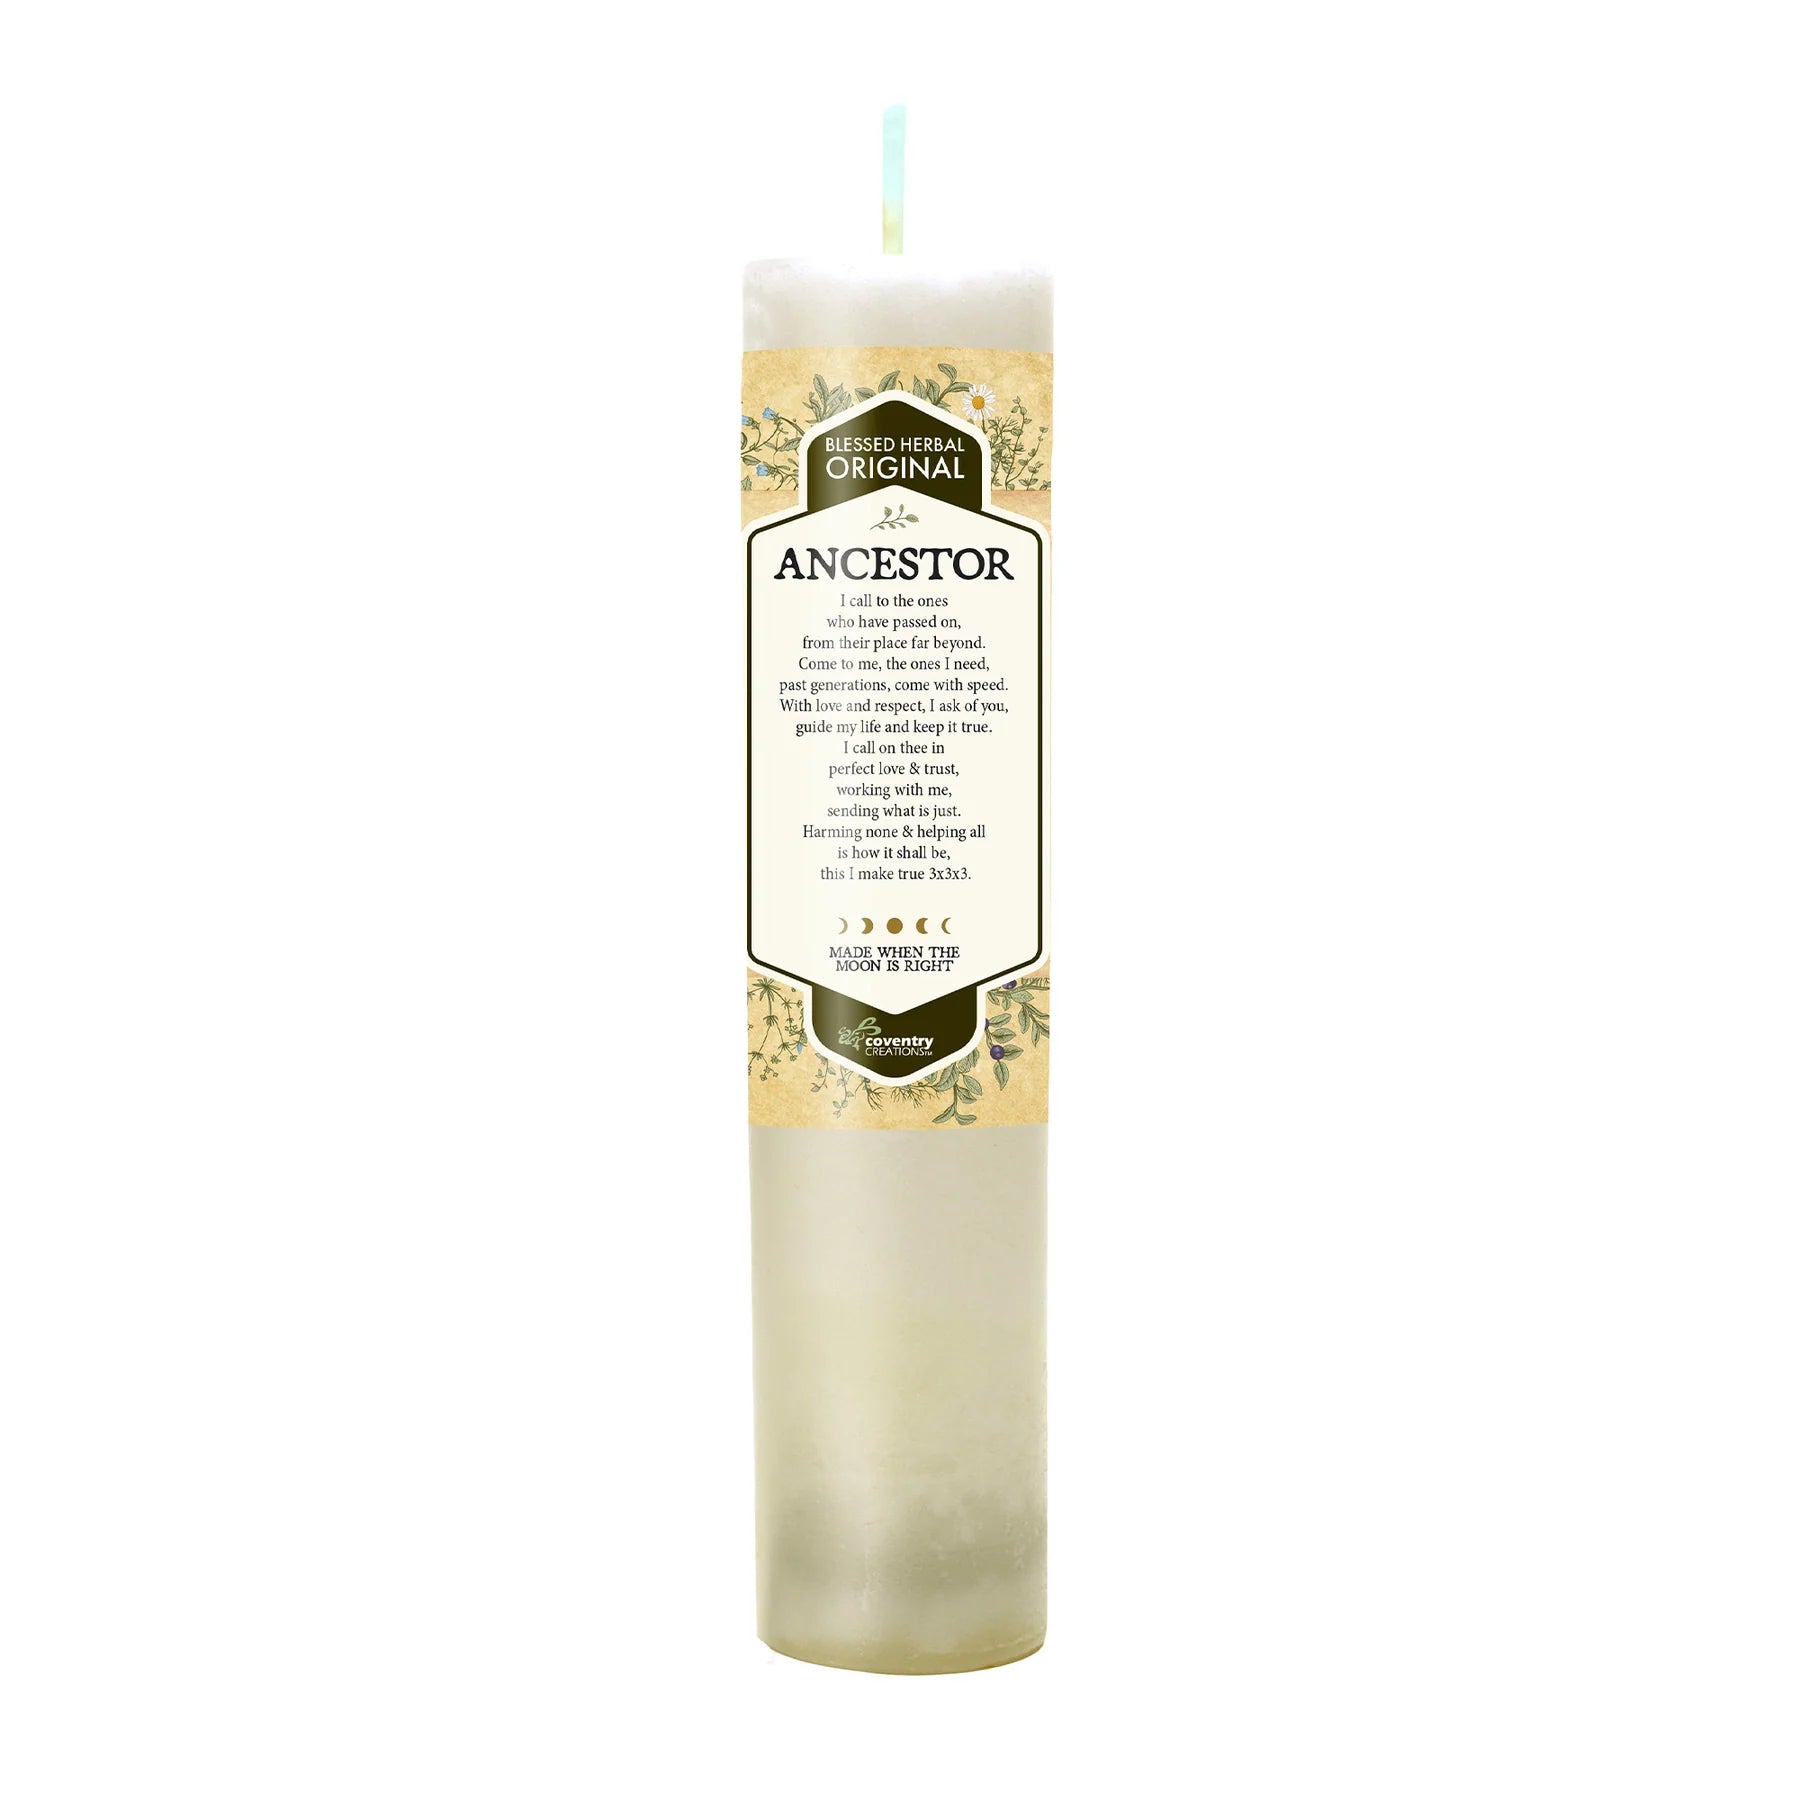 Ancestor Blessed Herbal Candle